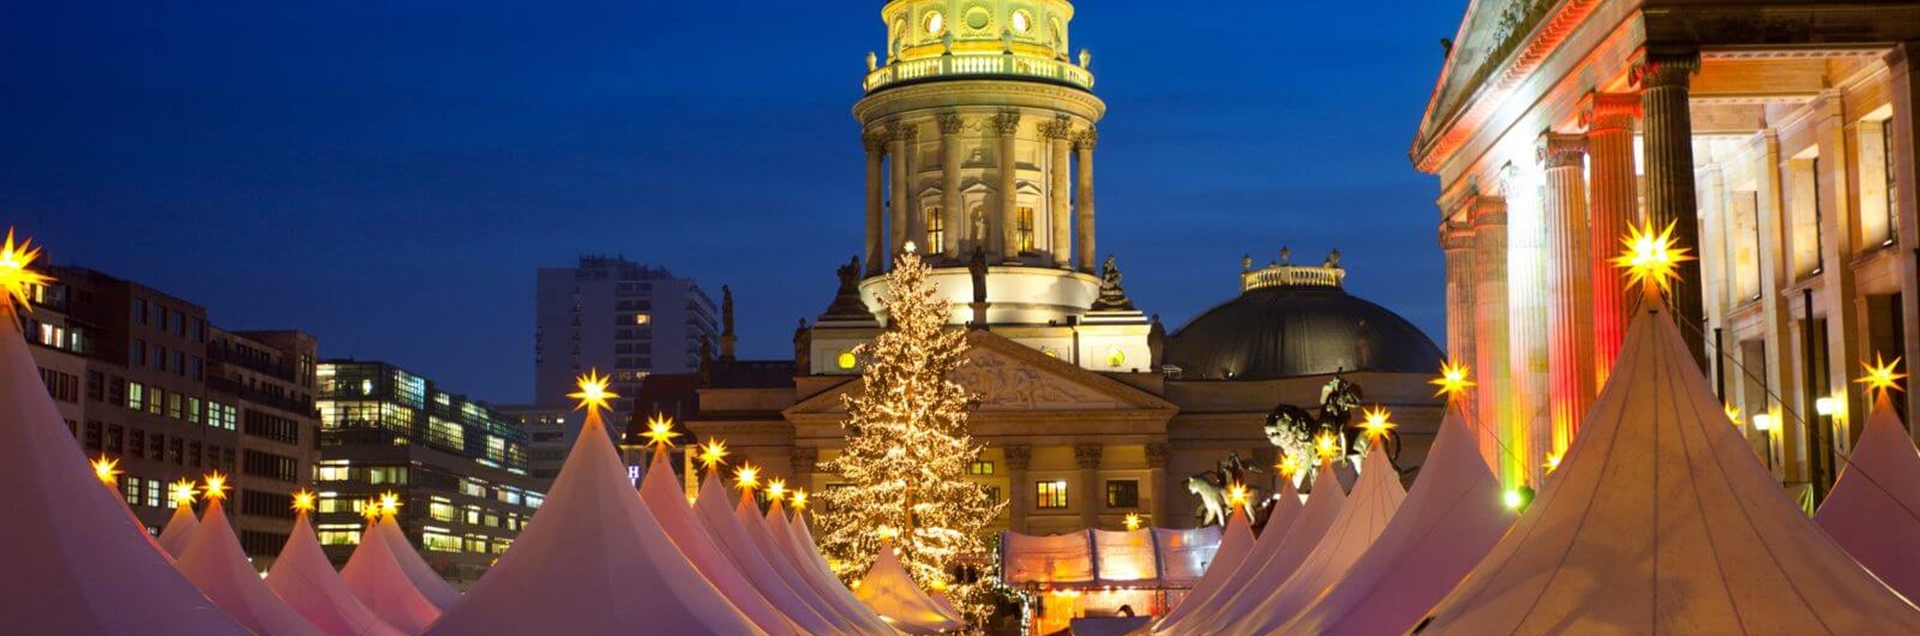 Sustainable Christmas markets: which ones to visit in Central Europe